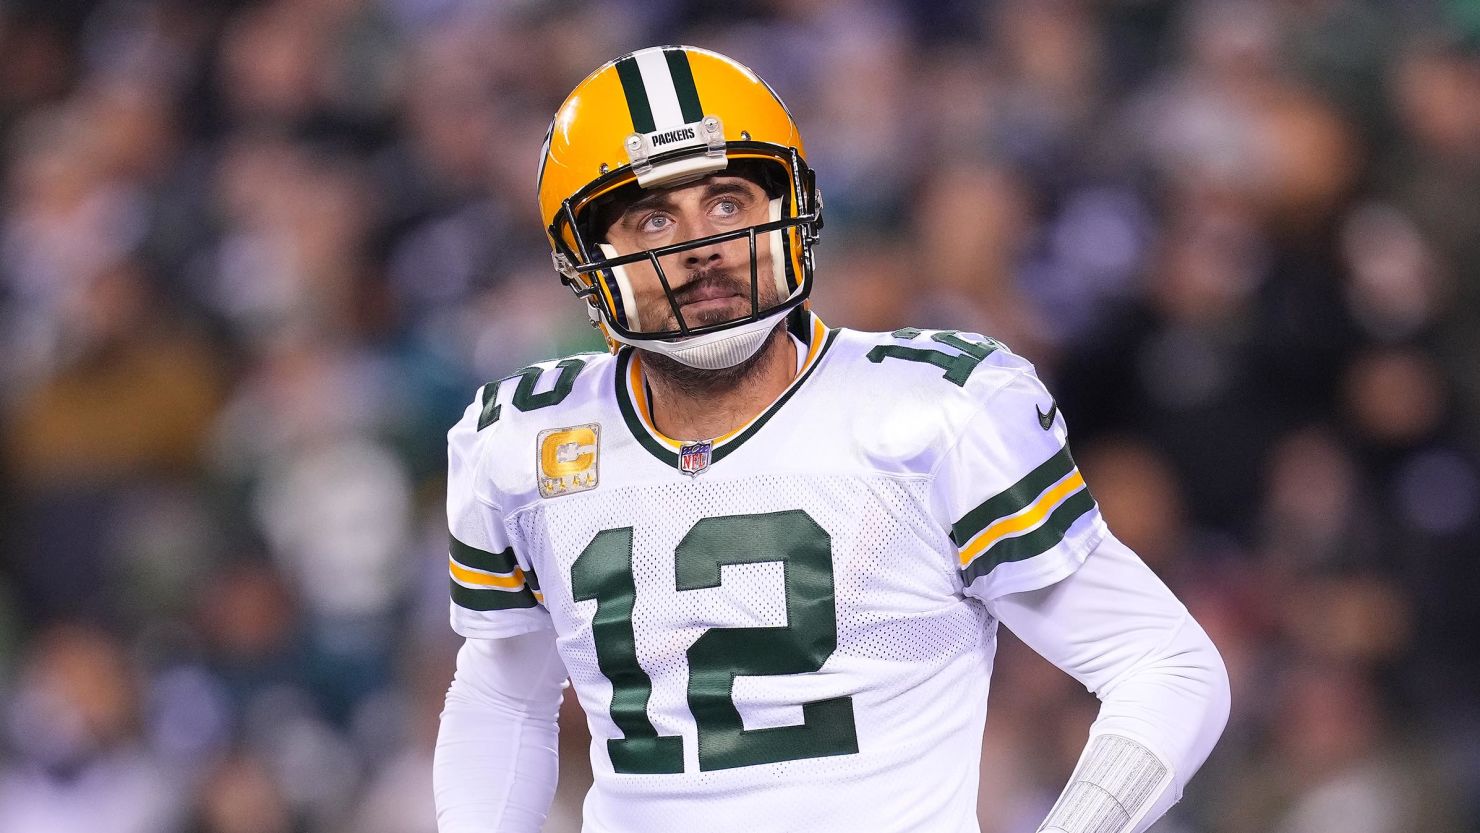 Aaron Rodgers says he intends to play for the New York Jets.